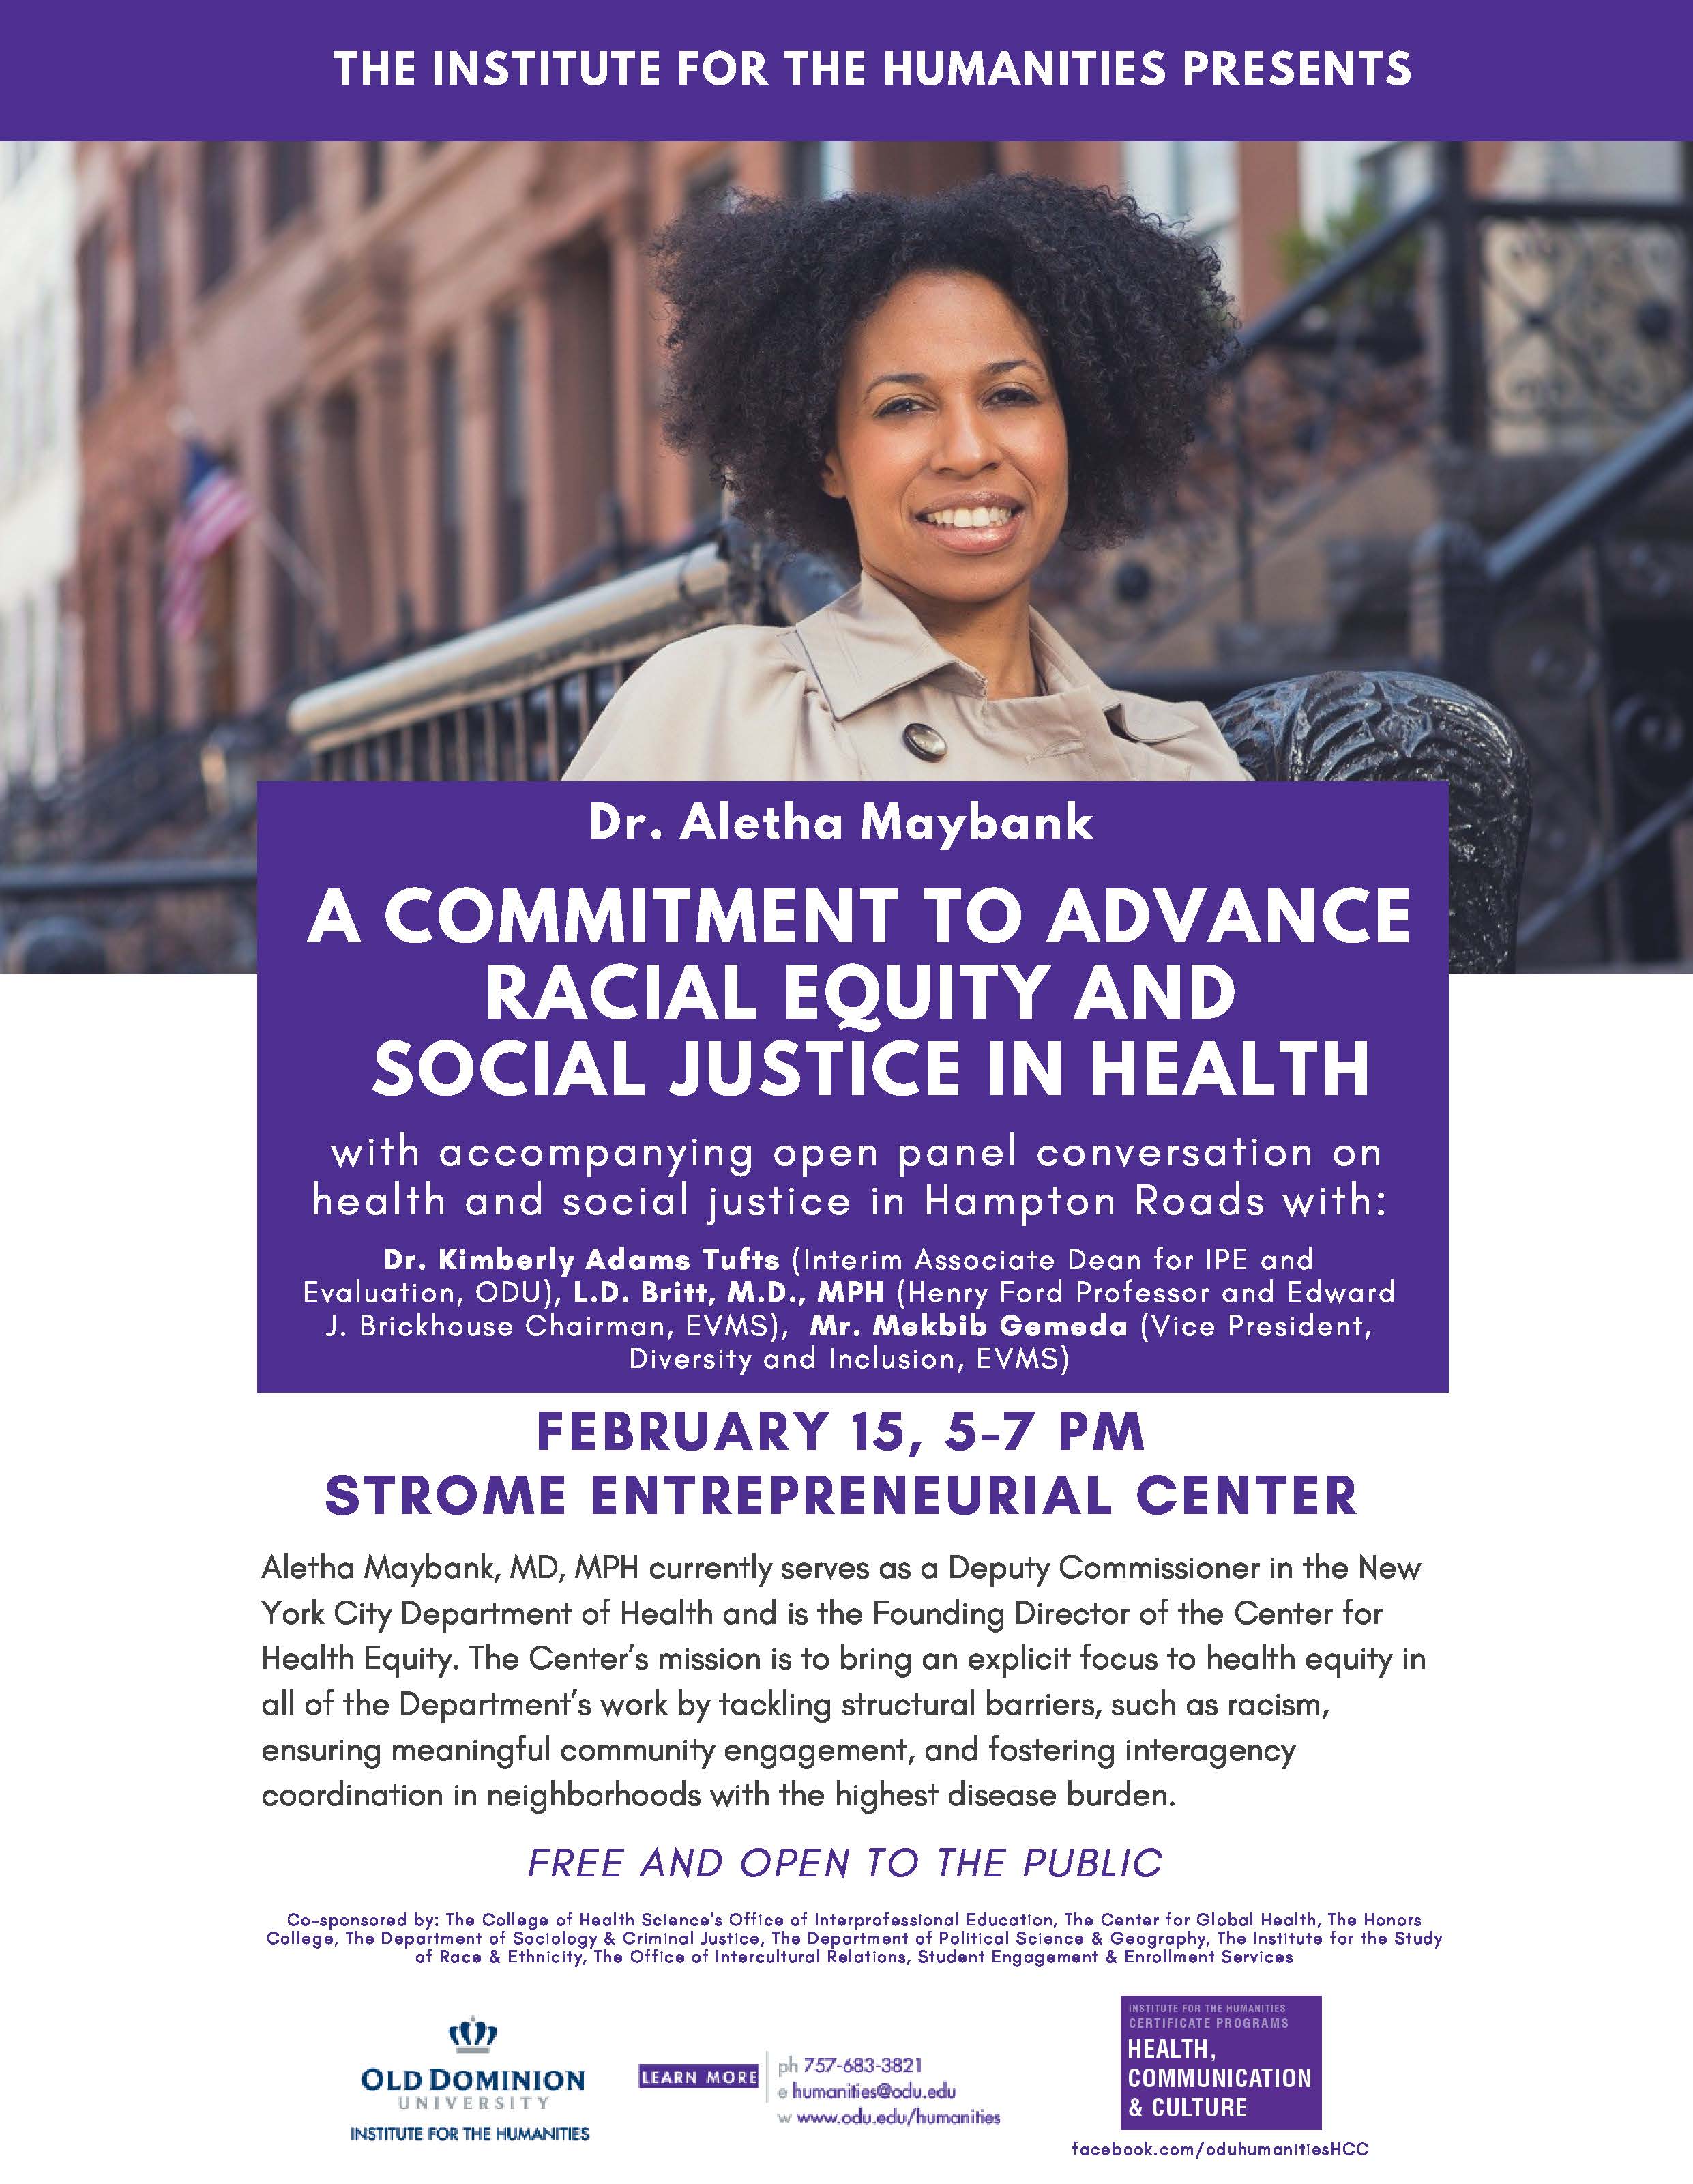 A Commitment to Advance Racial Equality and Social Justice in Health